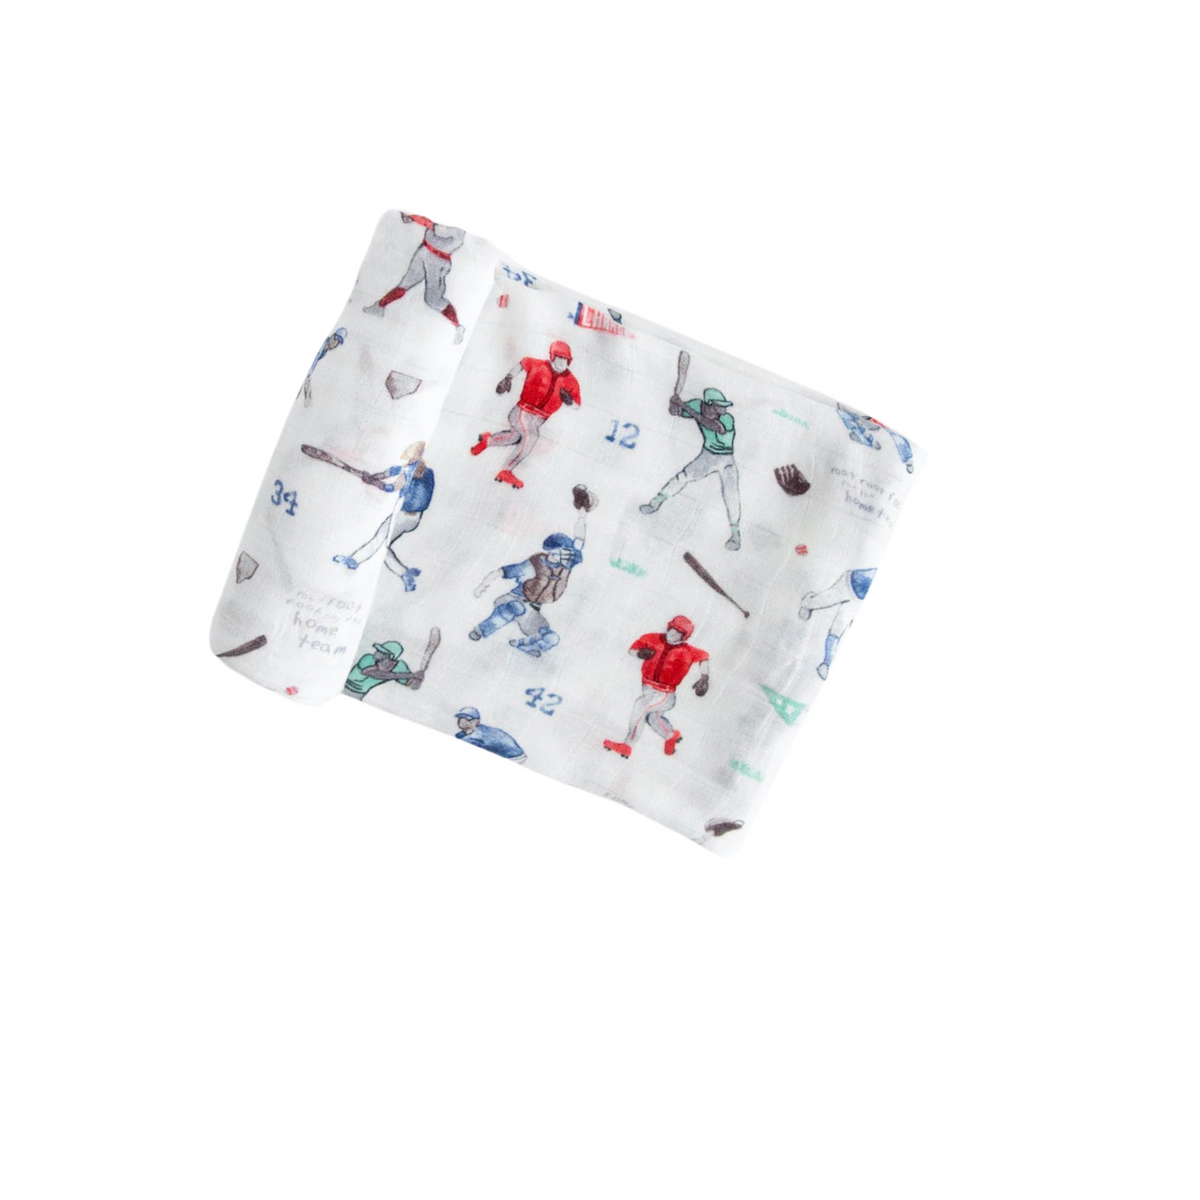 Home Run Deluxe Muslin Swaddle